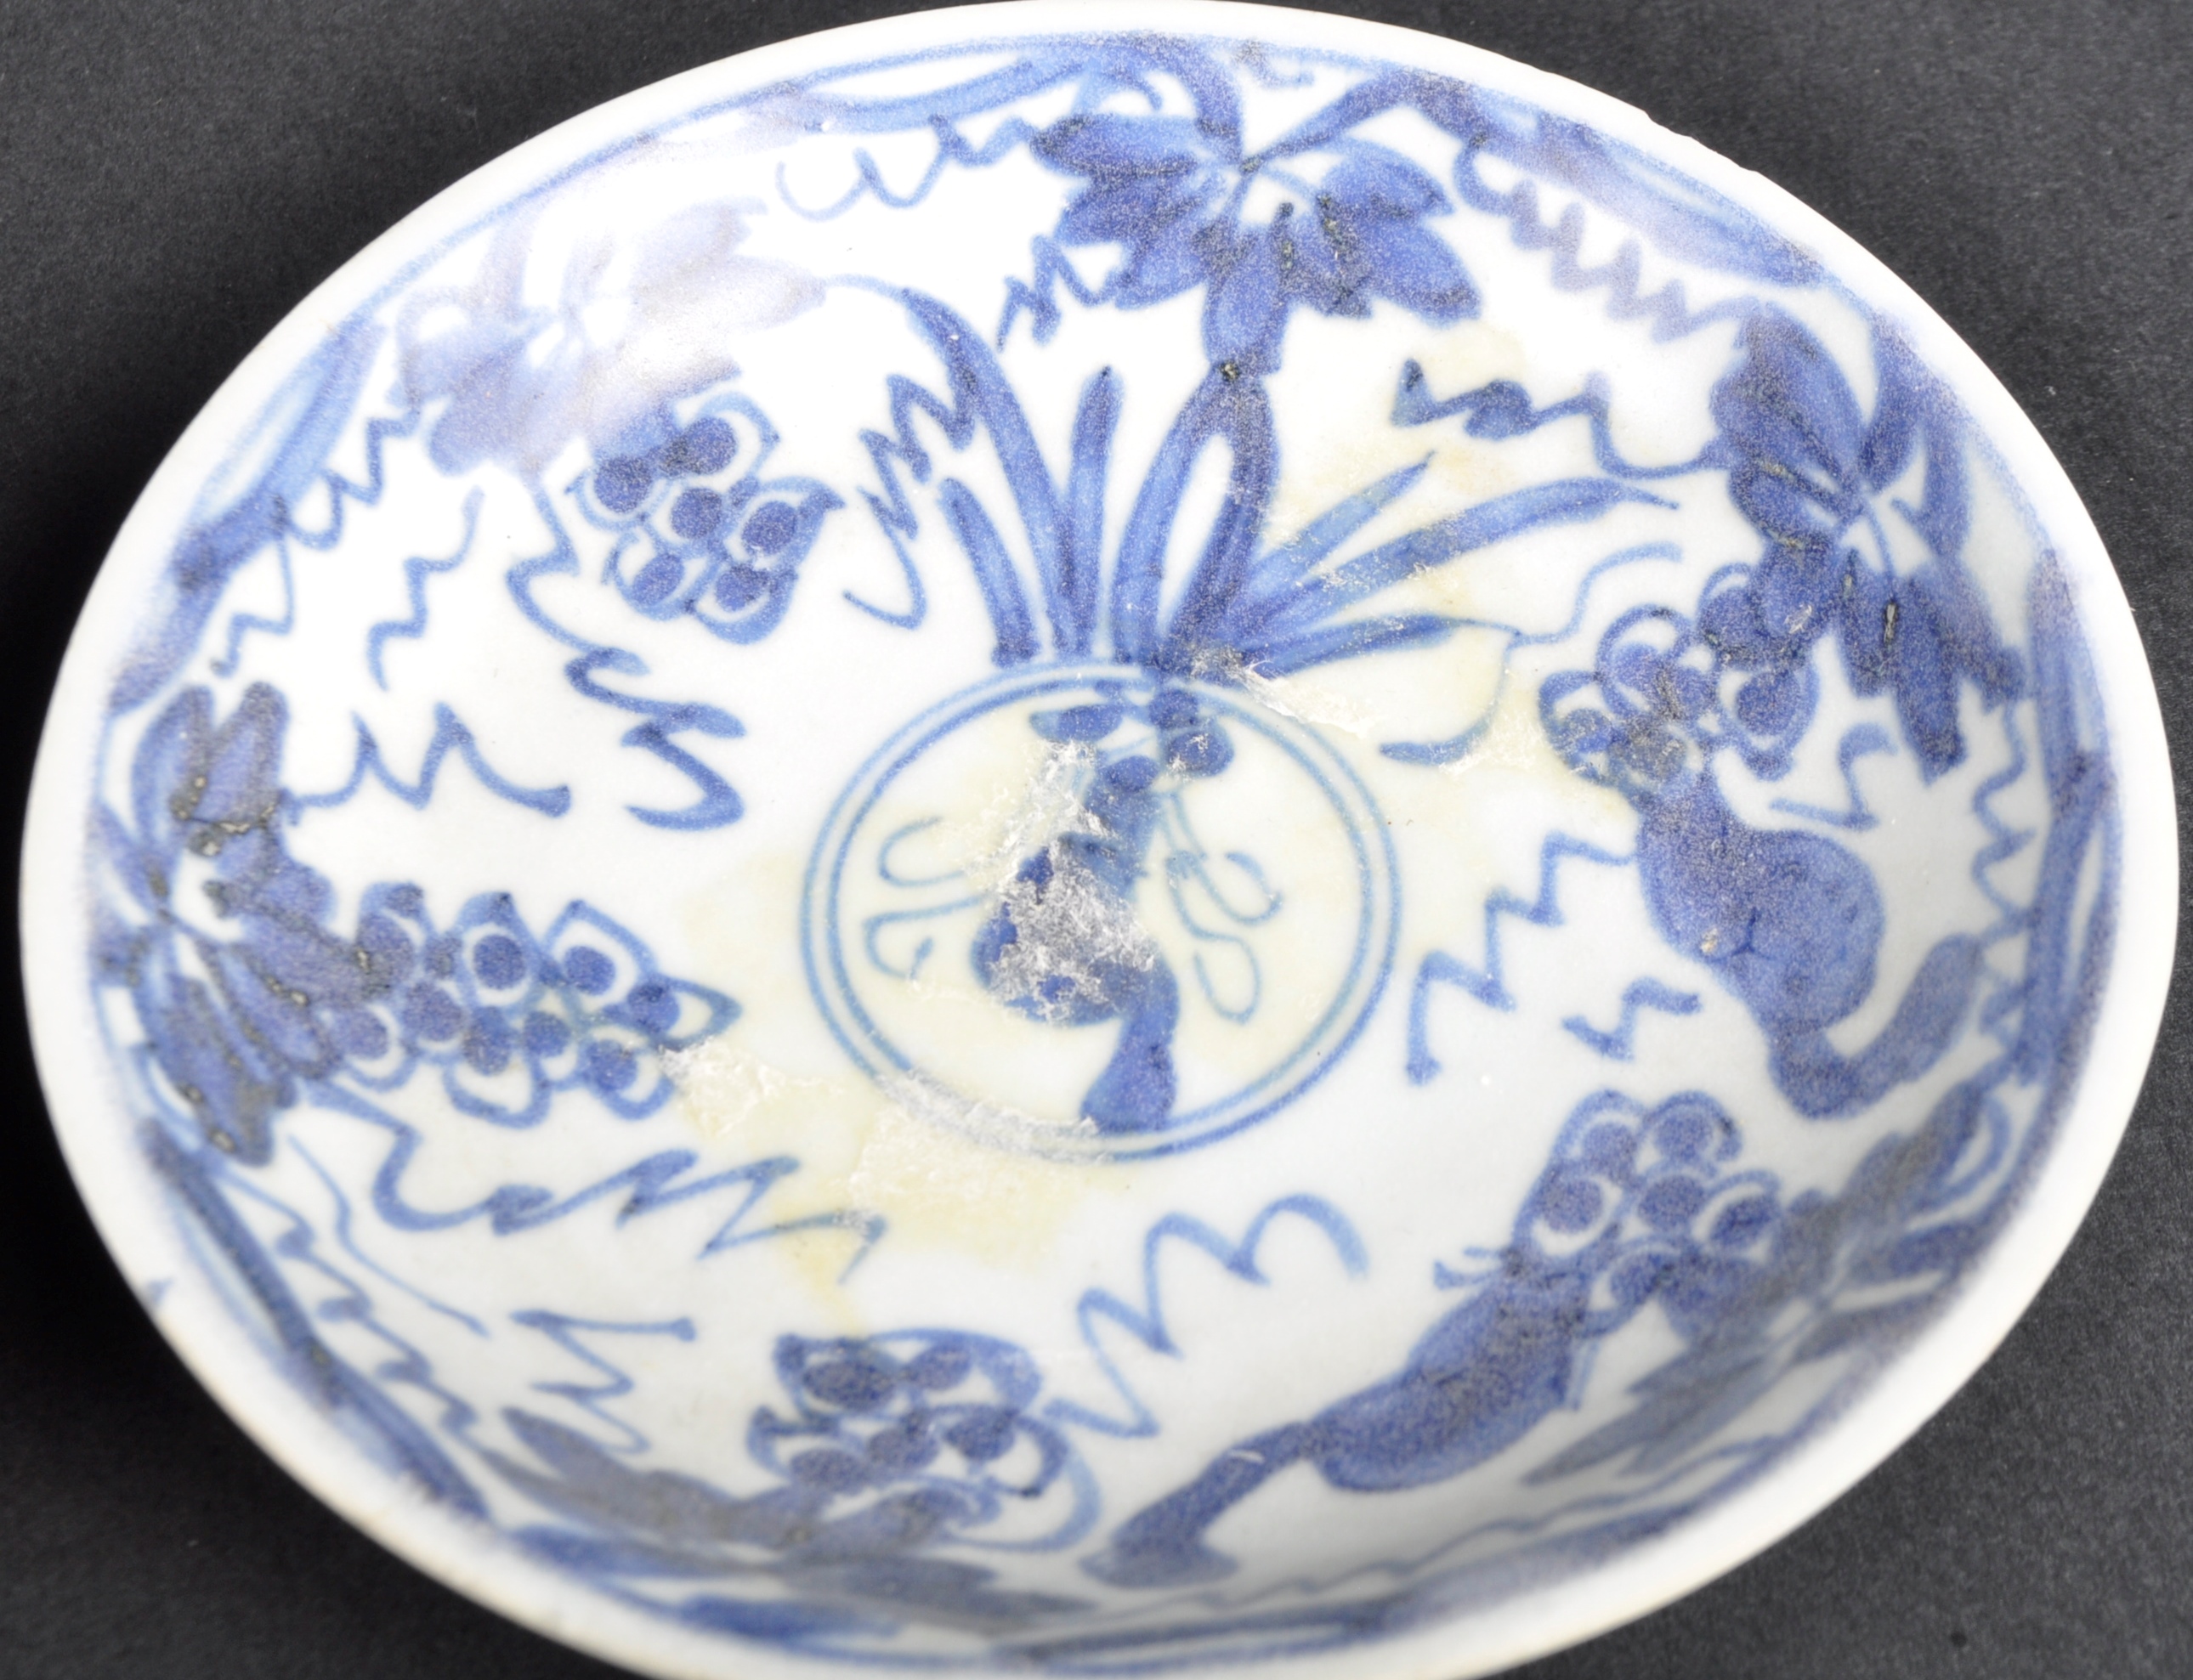 COLLECTION OF 17TH CENTURY CHINESE MING DYNASTY PORCELAIN - Image 6 of 8